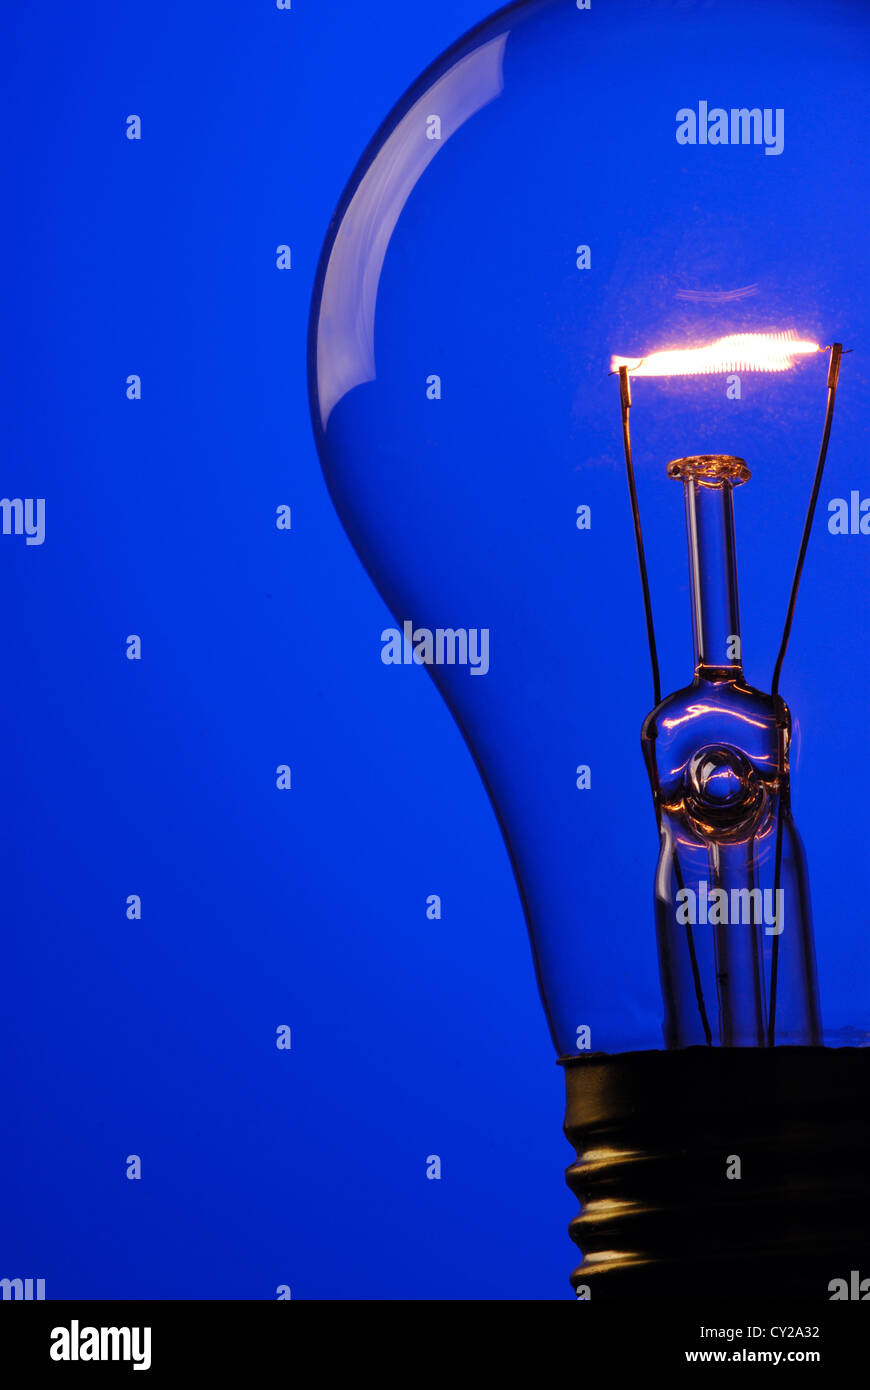 A full page macro of a light bulb on an electric blue background. Stock Photo